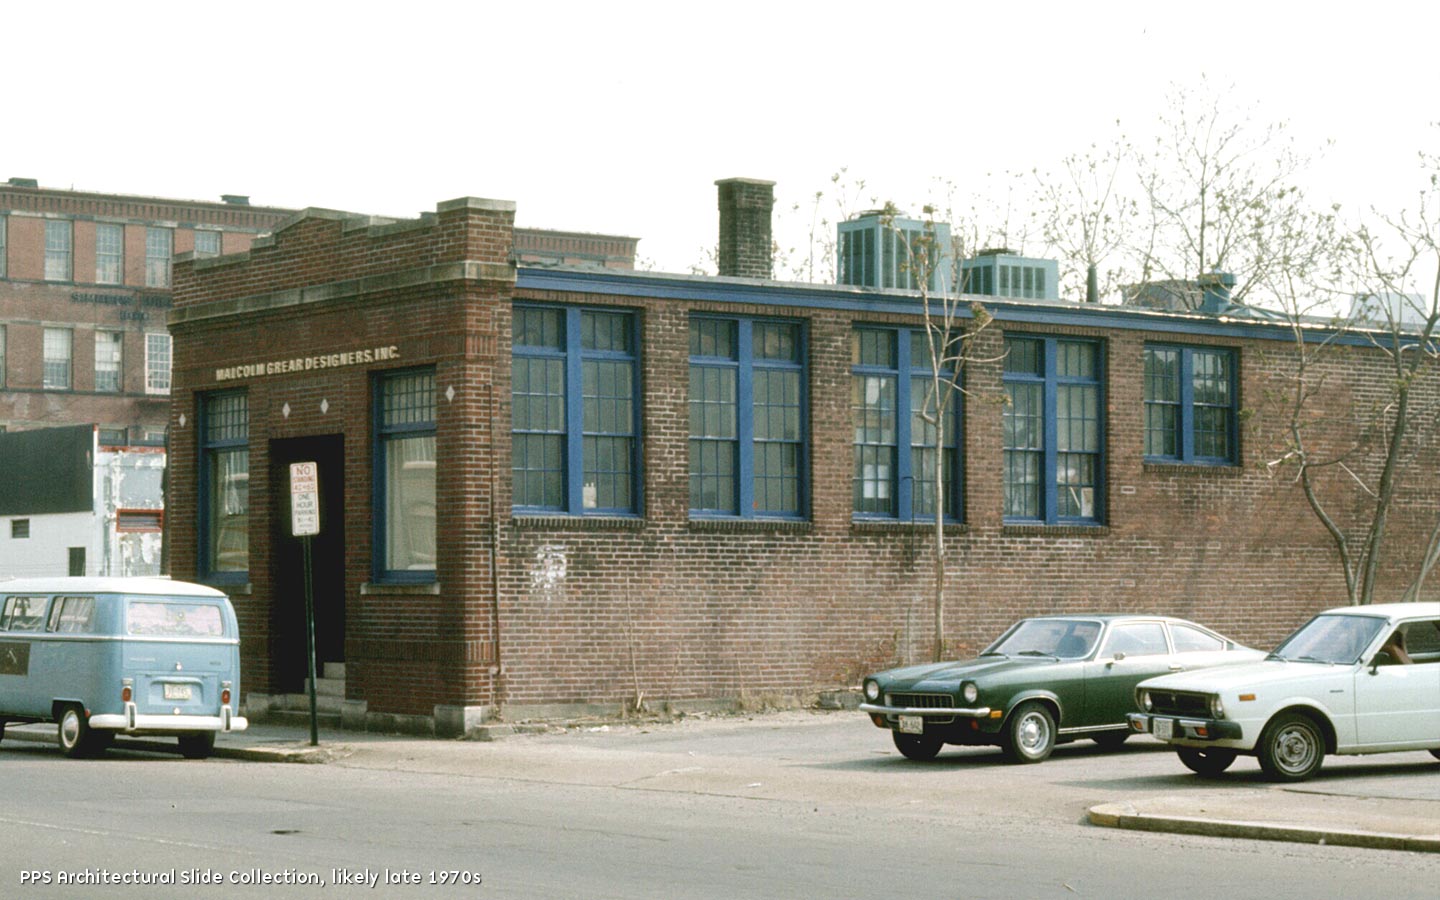 A one story red brick flat roof industrial building with a narrow façade and simple ornamentation.